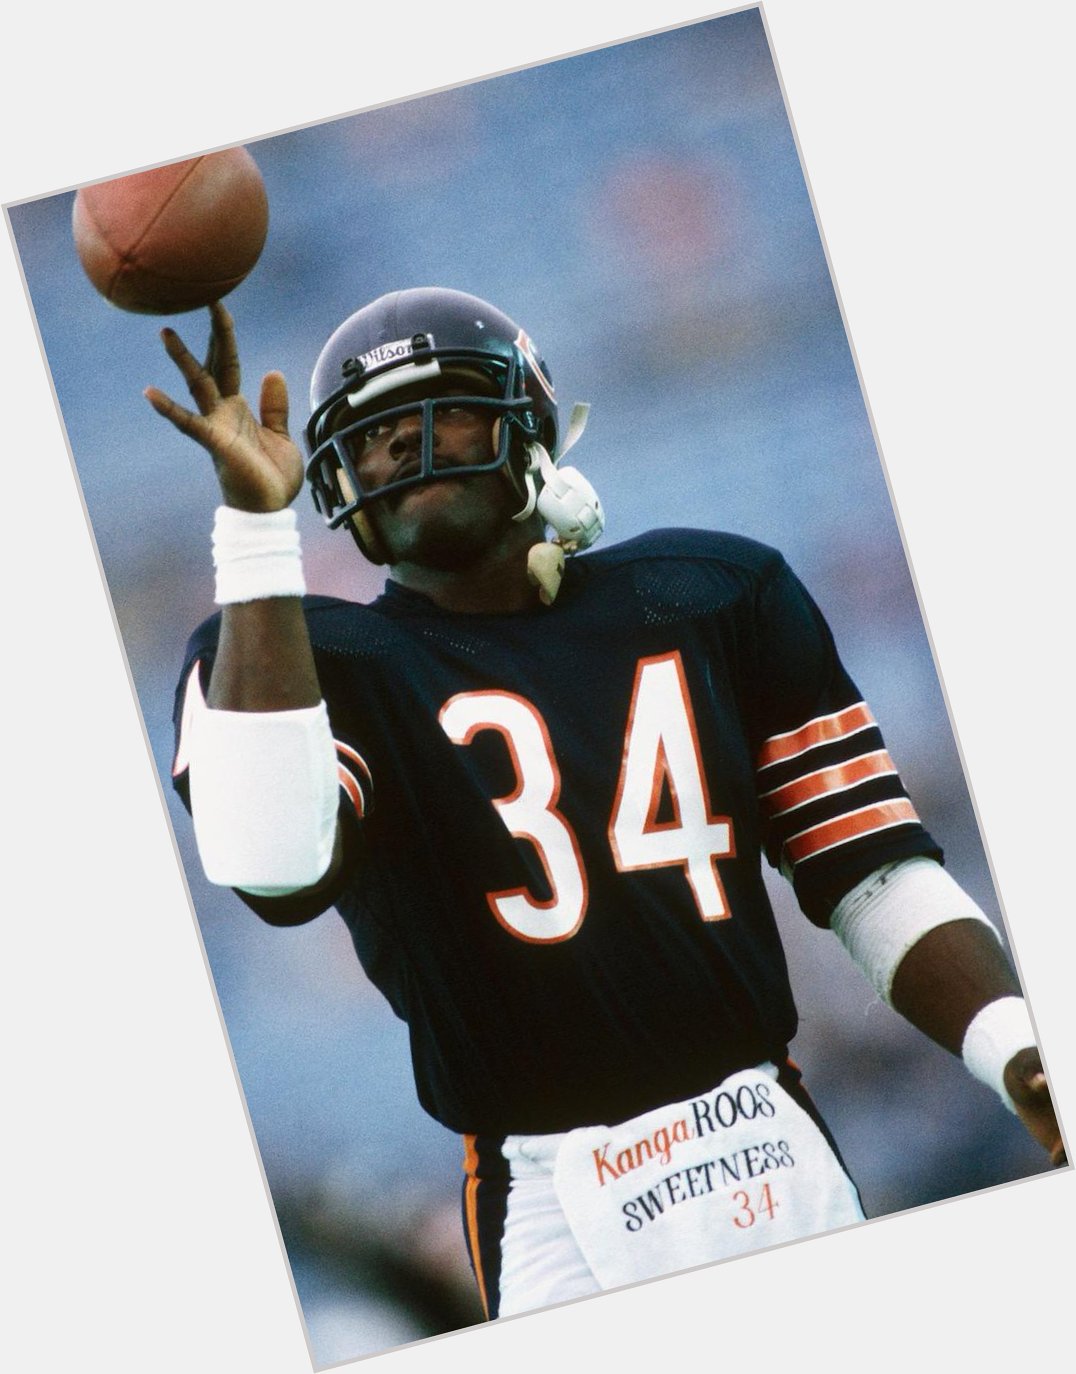 Happy Birthday to Walter Payton, one of the greatest to ever suit up. 